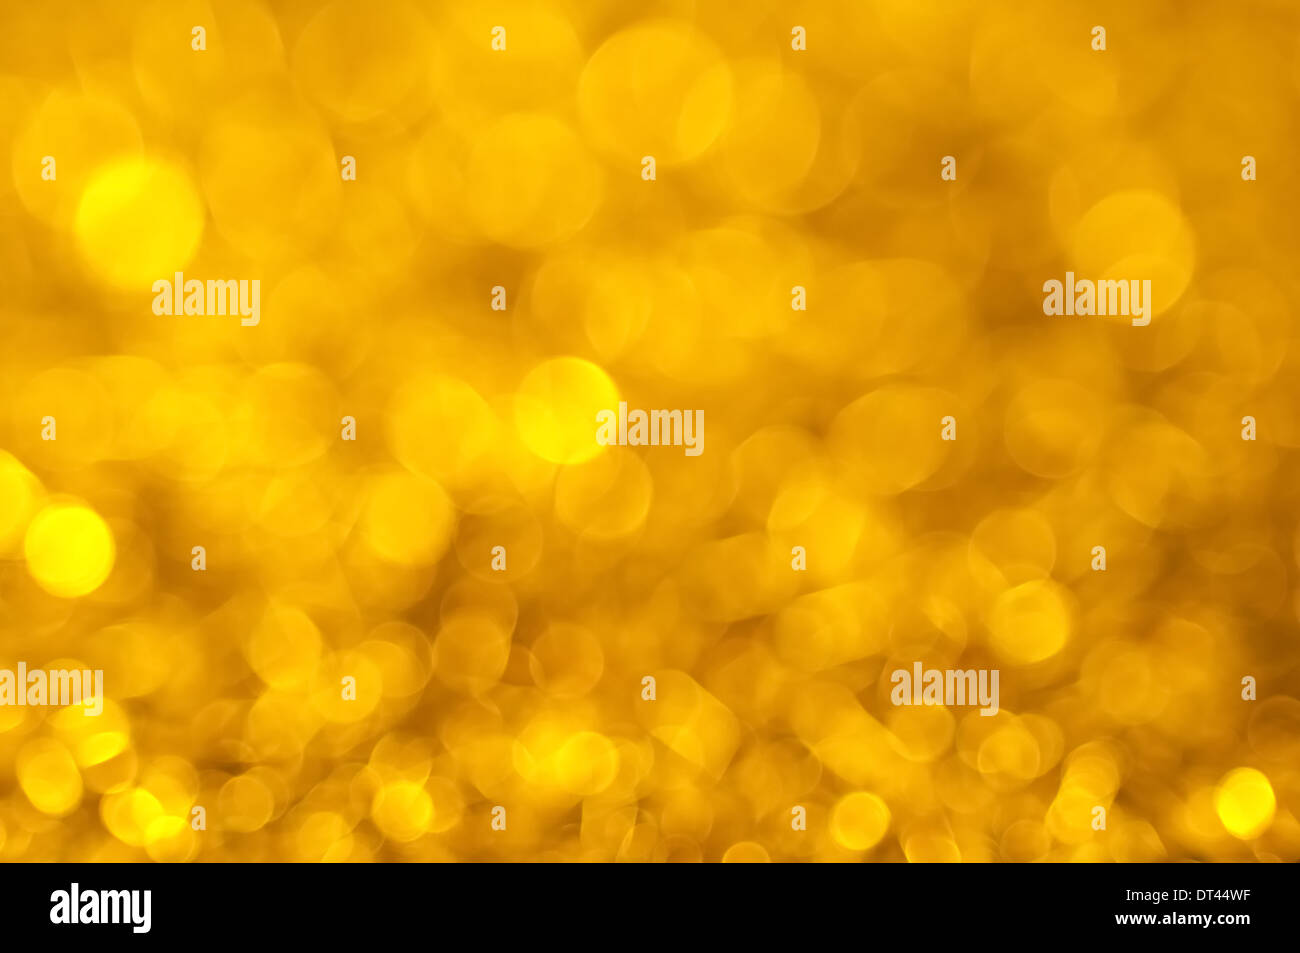 abstract christmas background Stock Photo